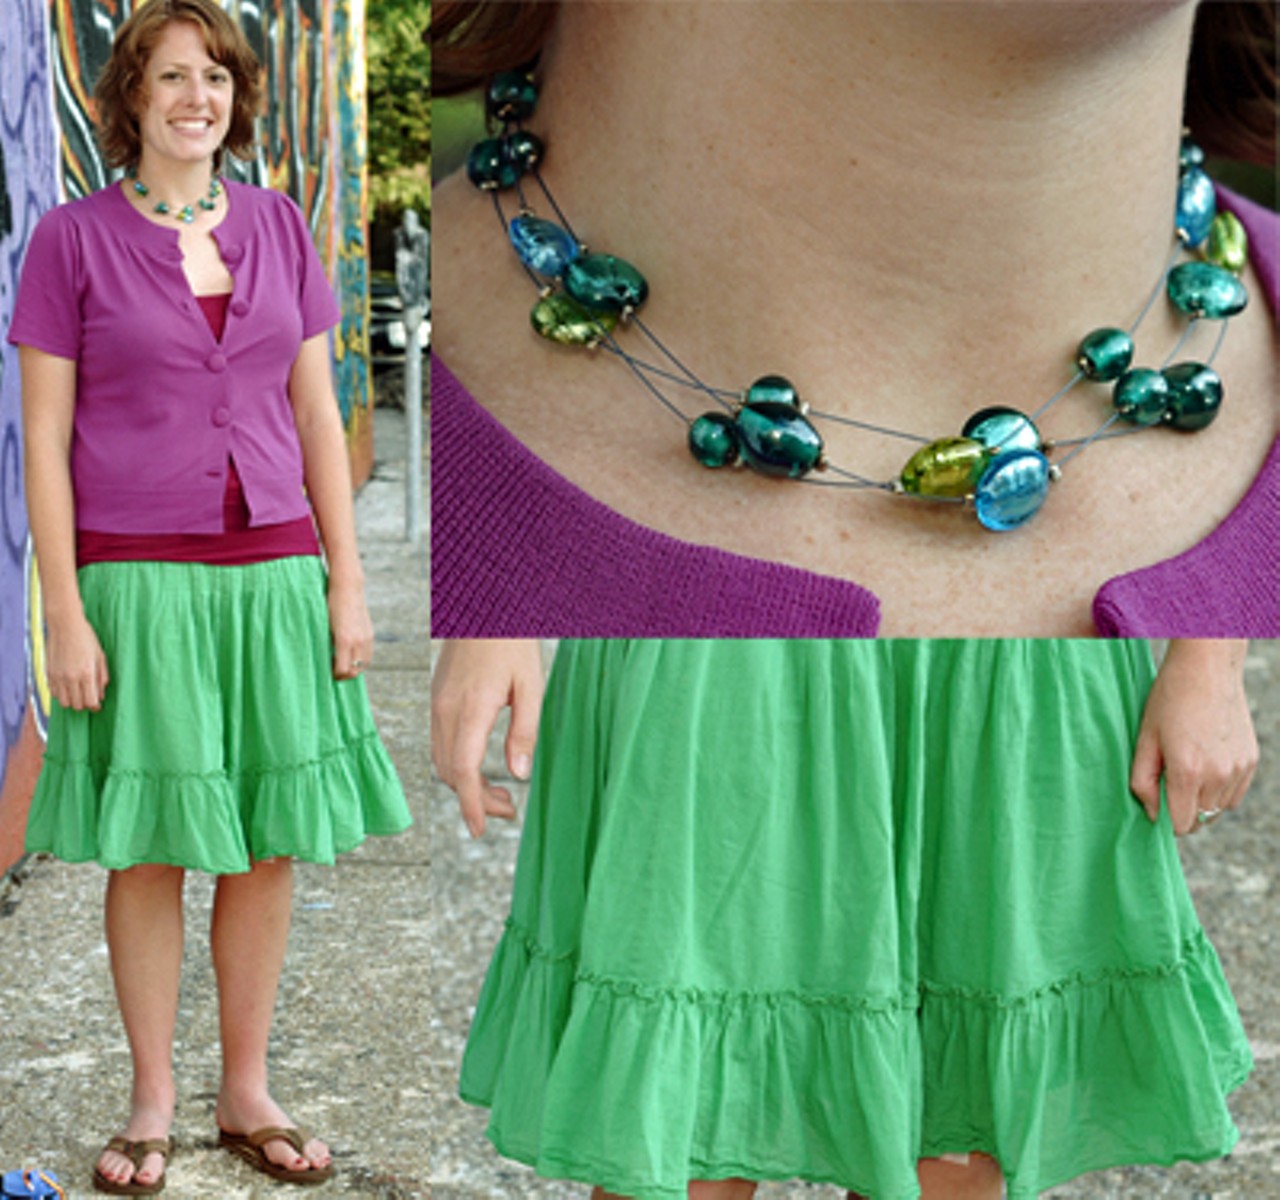 Leslie, 26, Dogtown
Skirt: From the Gap. She bought it because she likes green. Necklace: From Moroni Island, Venice. Also purchased because it's green.
Summer Style: Bright colors.